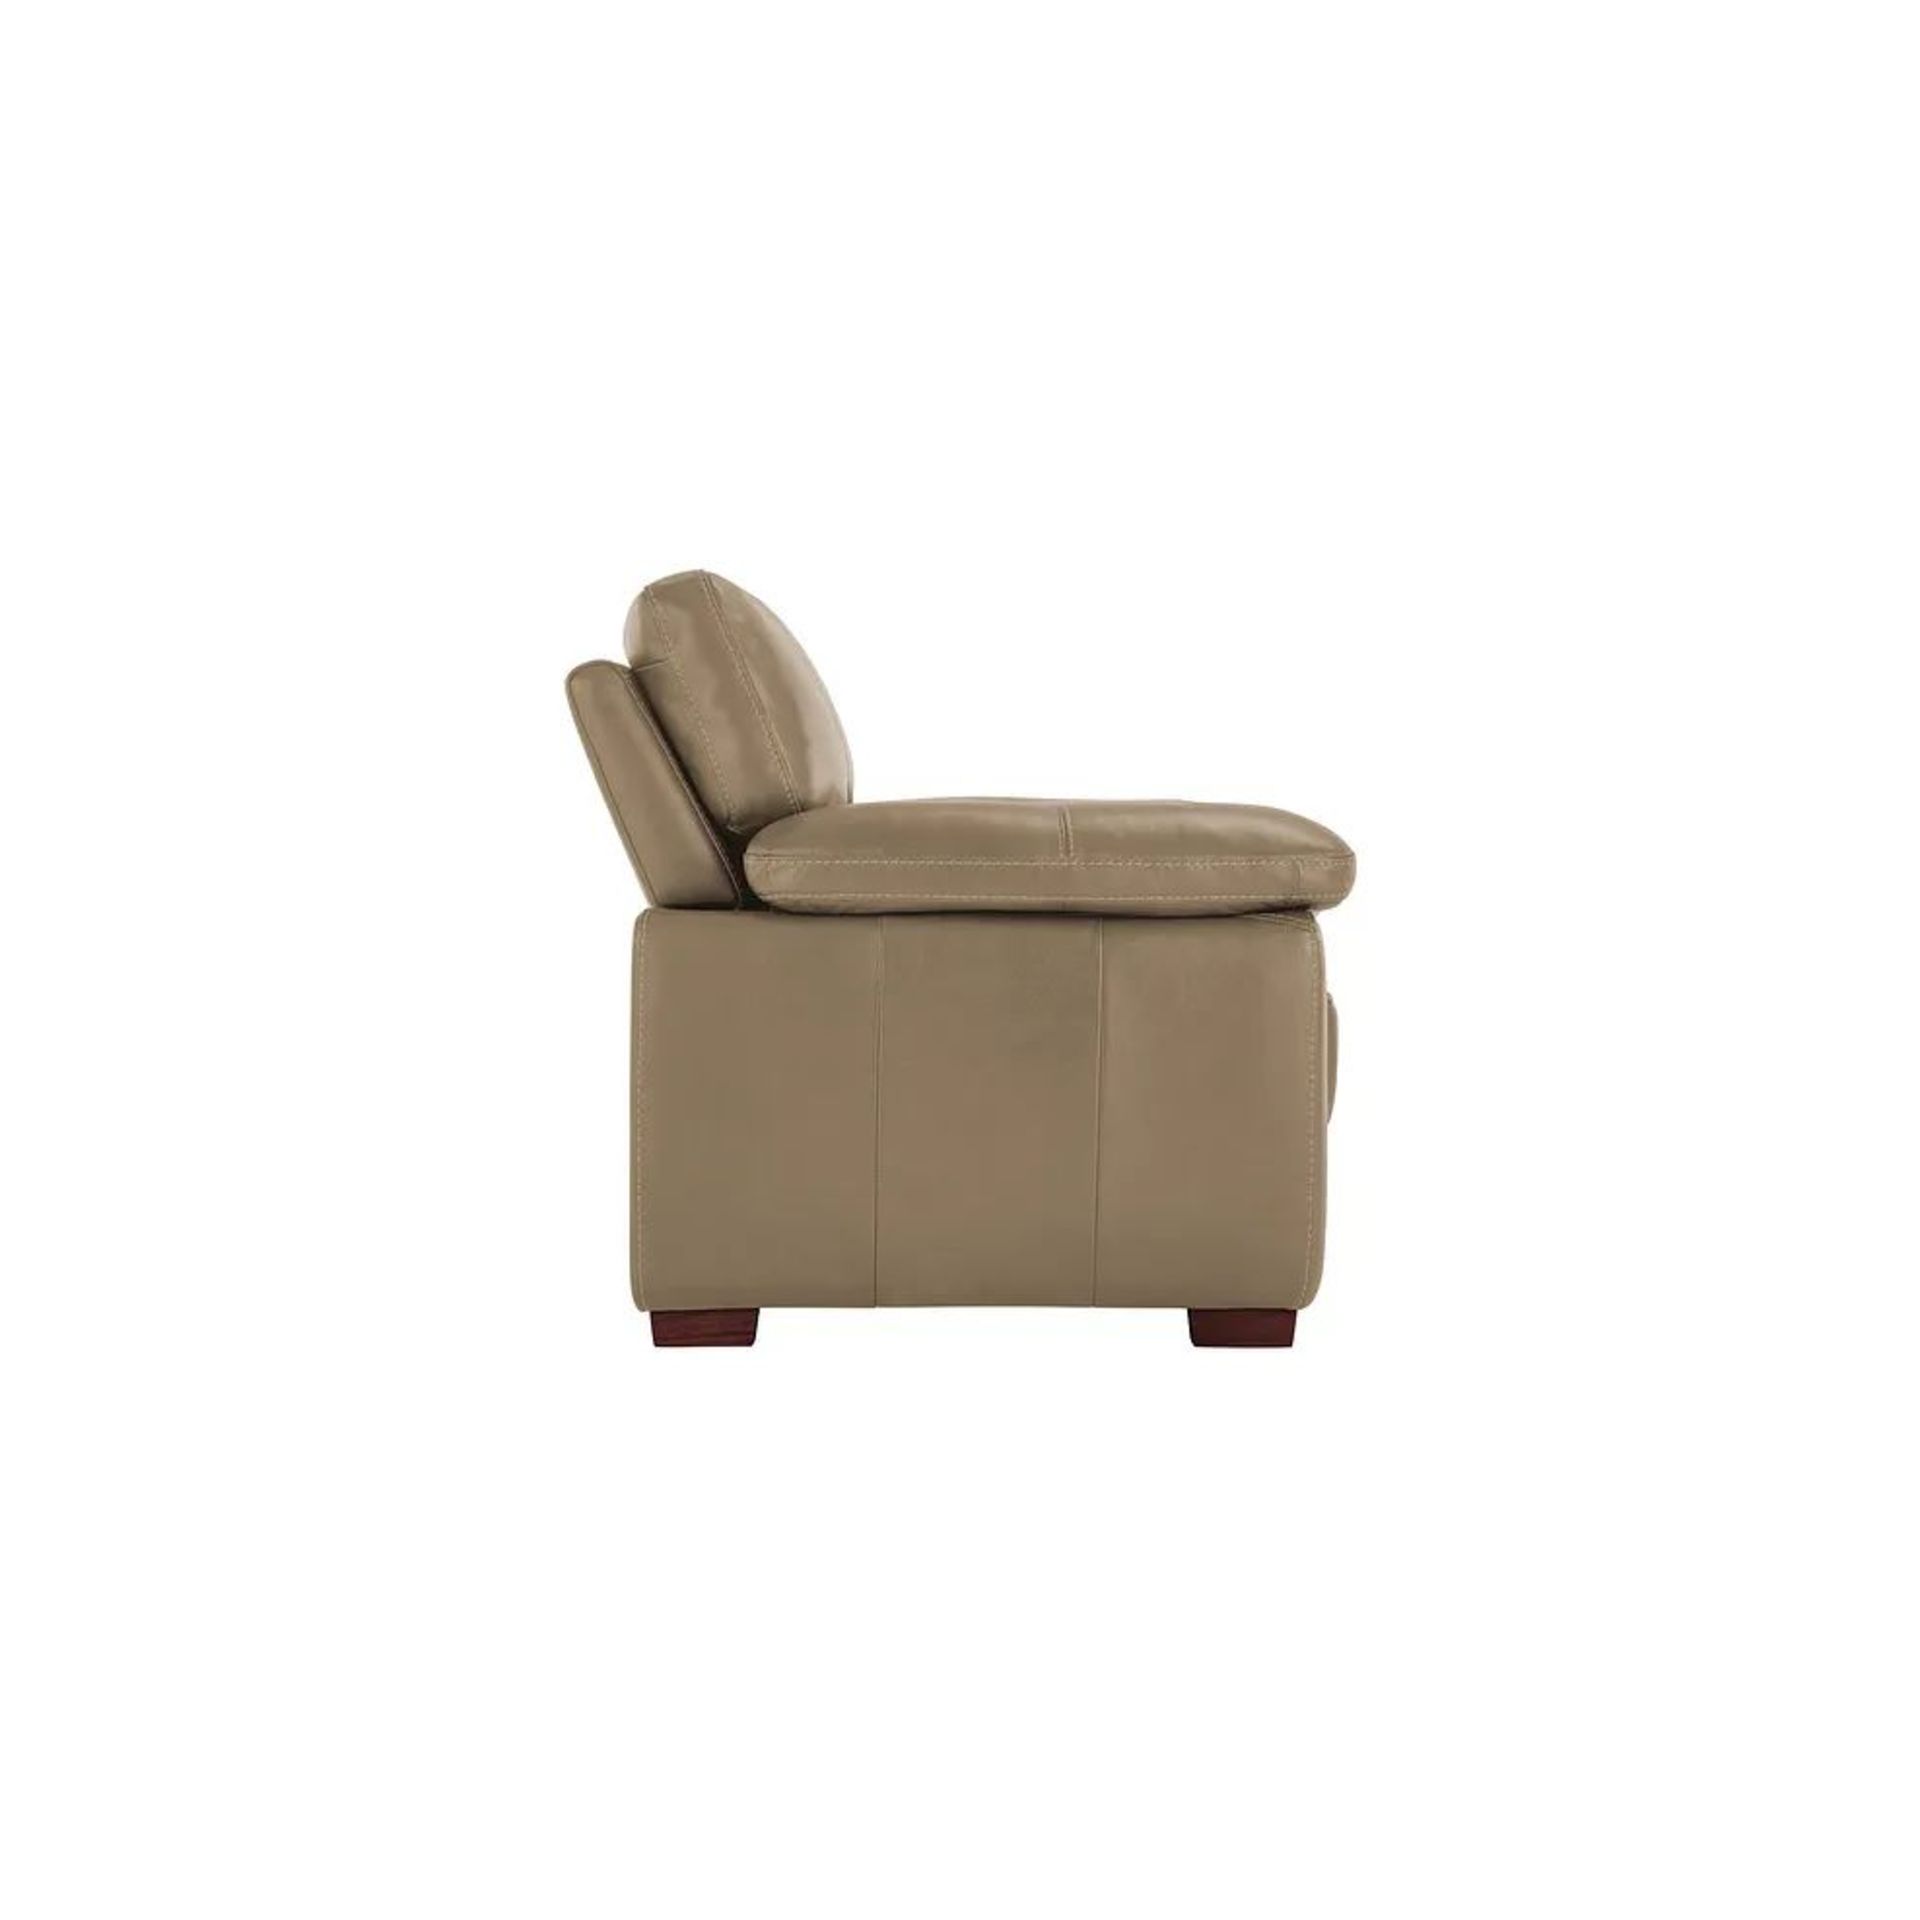 BRAND NEW ARLINGTON Armchair - BEIGE LEATHER. RRP £1099. Create a traditional and homely feel in - Image 4 of 9